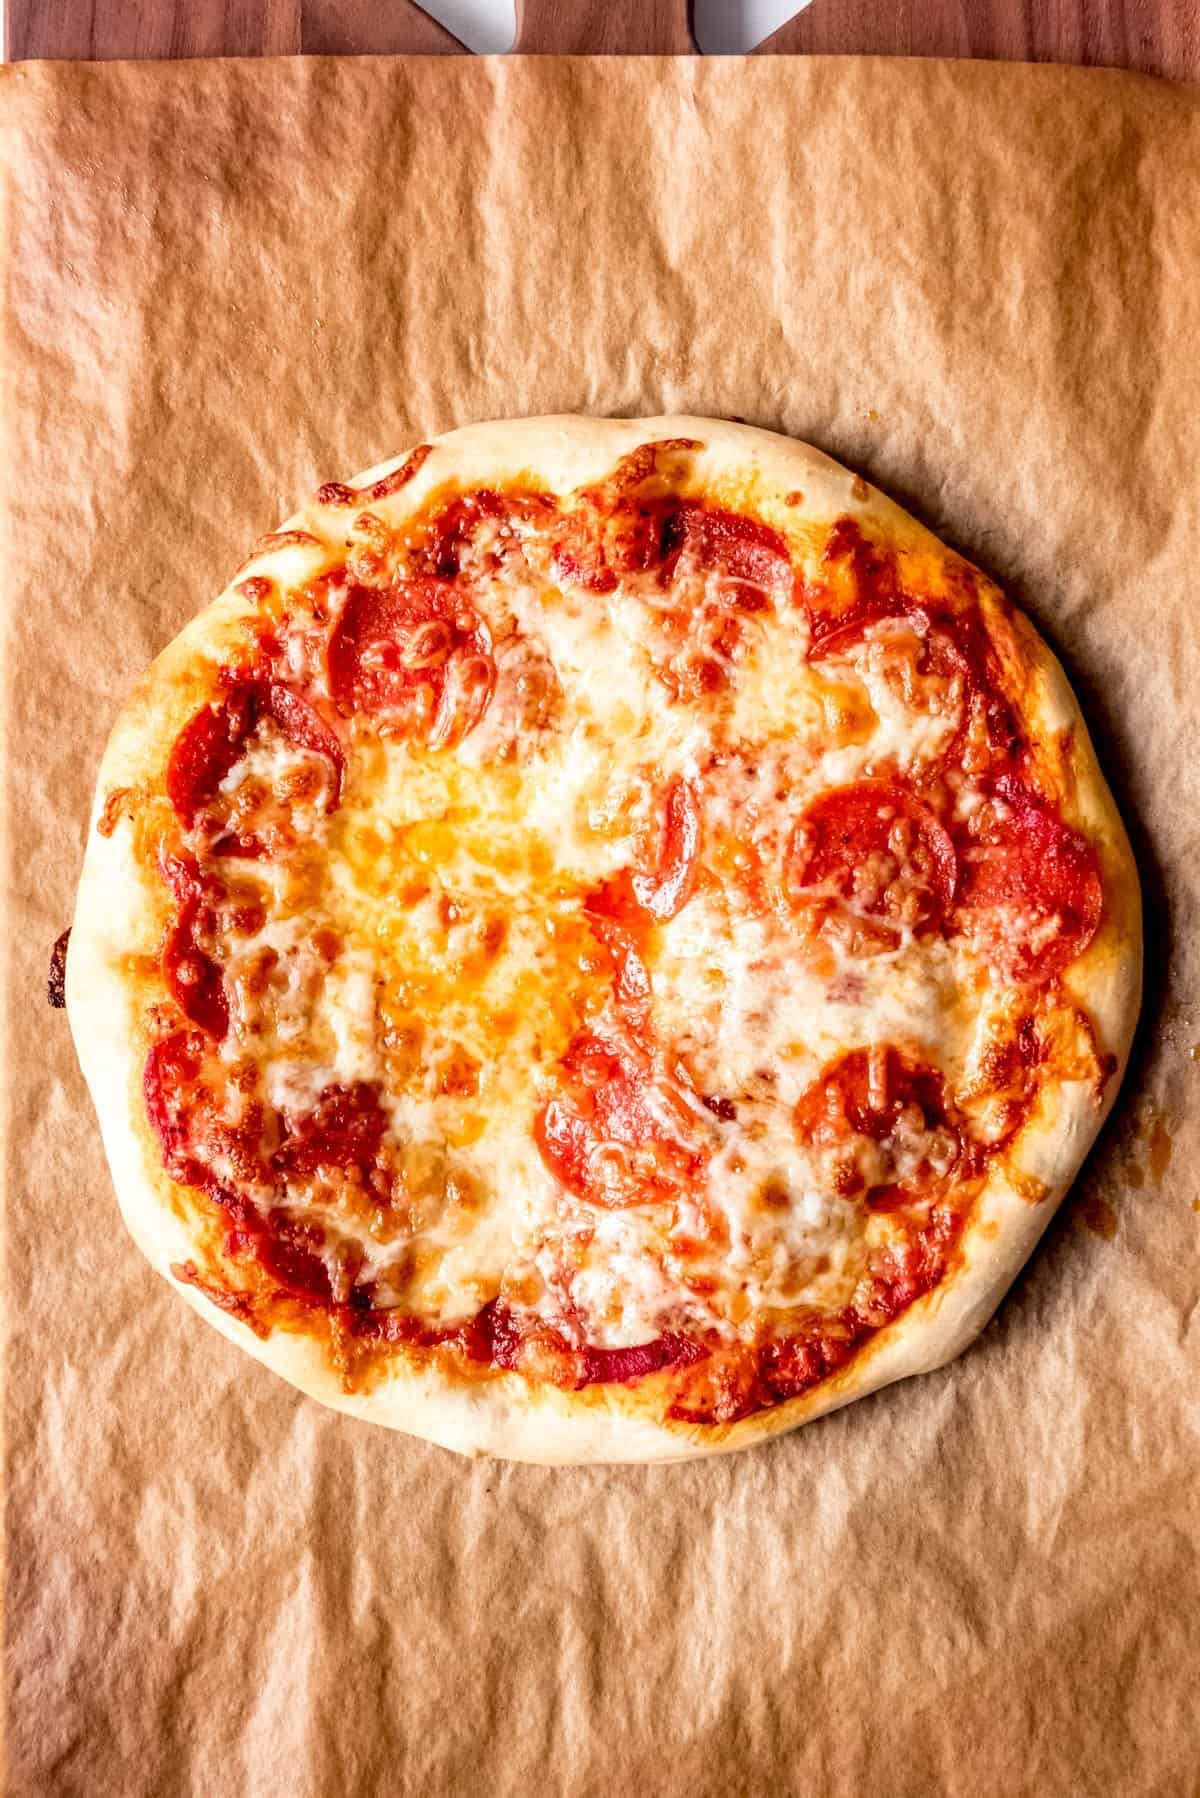 An image of a homemade pizza with melted cheese and pepperoni on top.